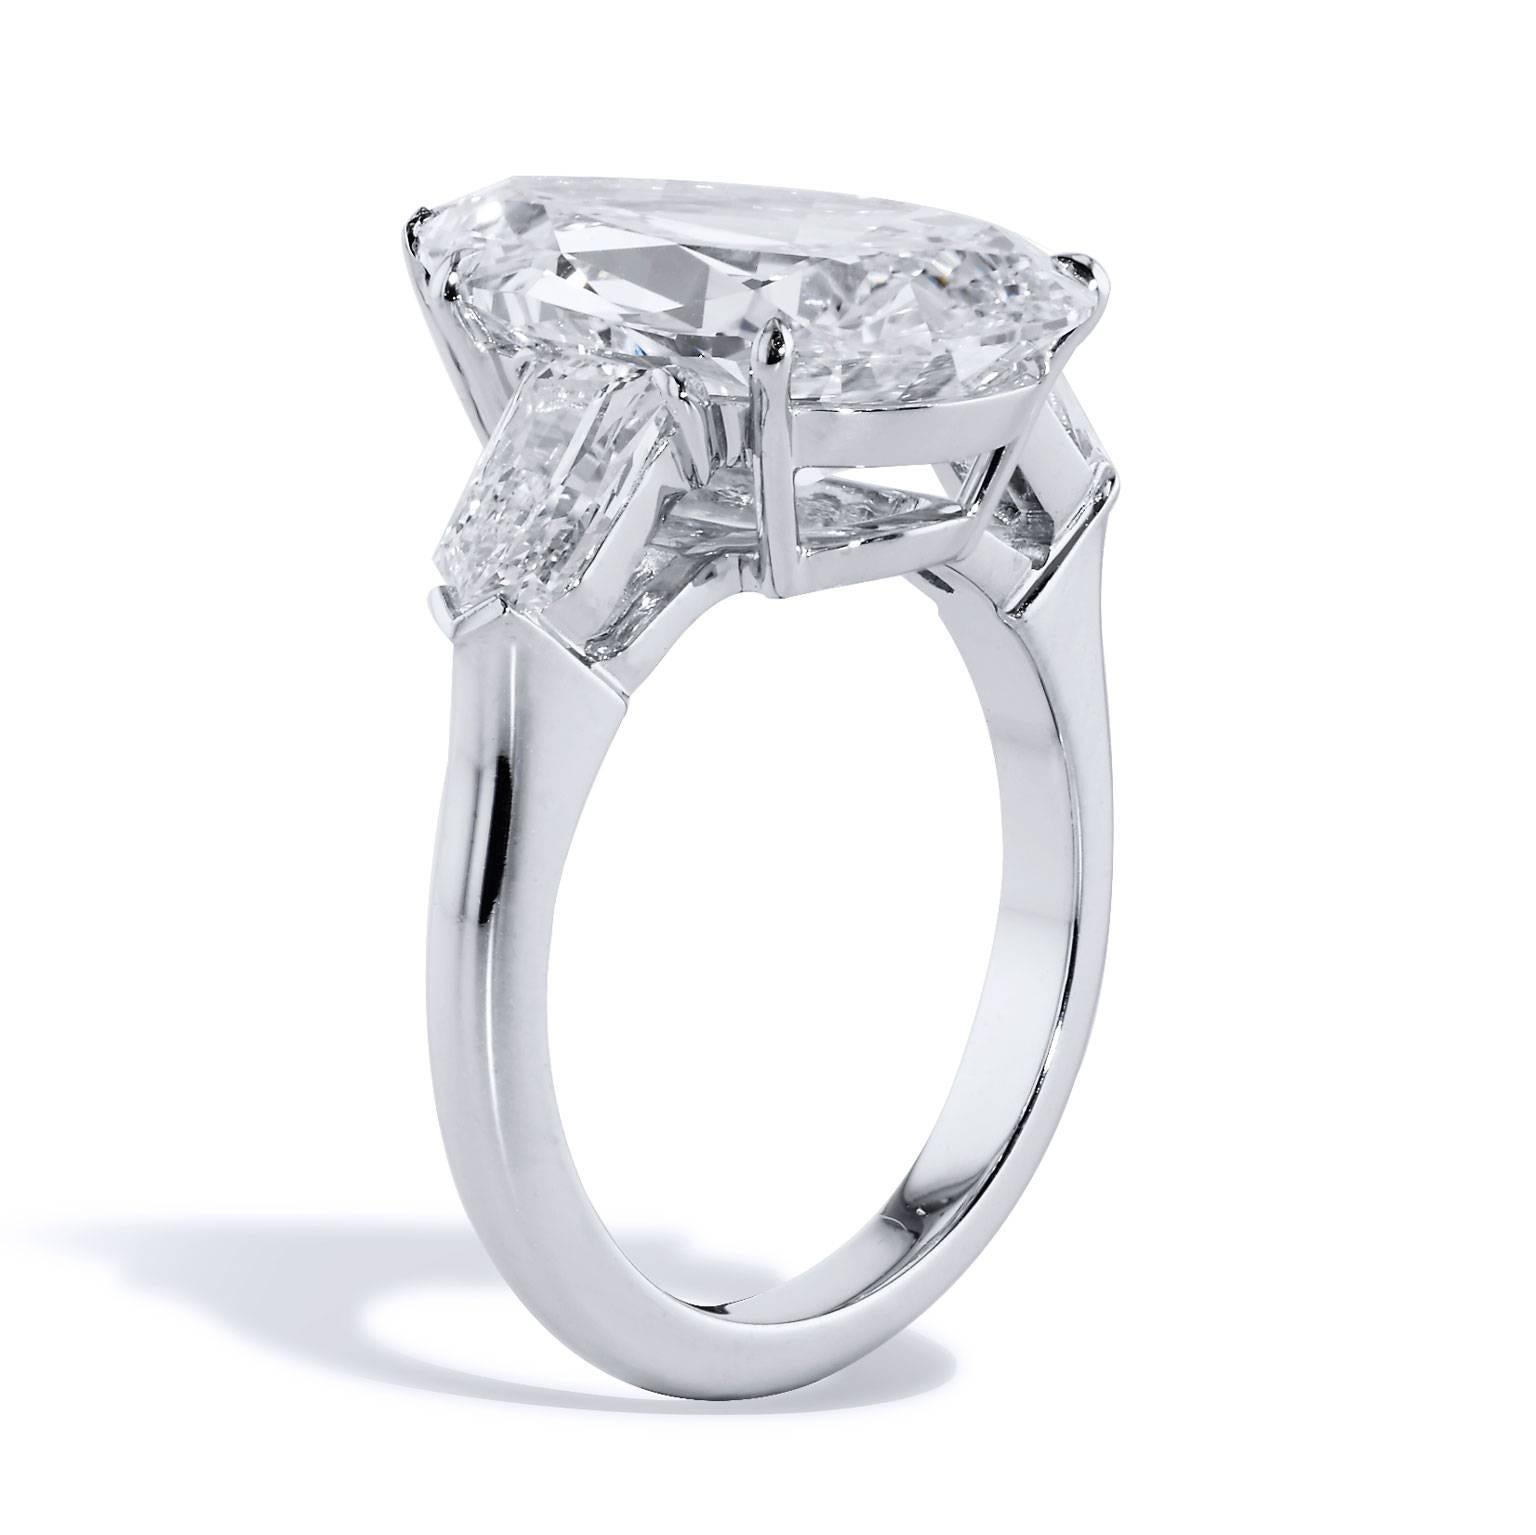 There are no words to match the exquisiteness of this diamond engagement ring. Set in platinum and featuring a massive and impeccable 7.01 carat pear-shaped diamond (H/VS2; GIA# 1176082015) at center, two bullet-shaped accent diamonds with a total